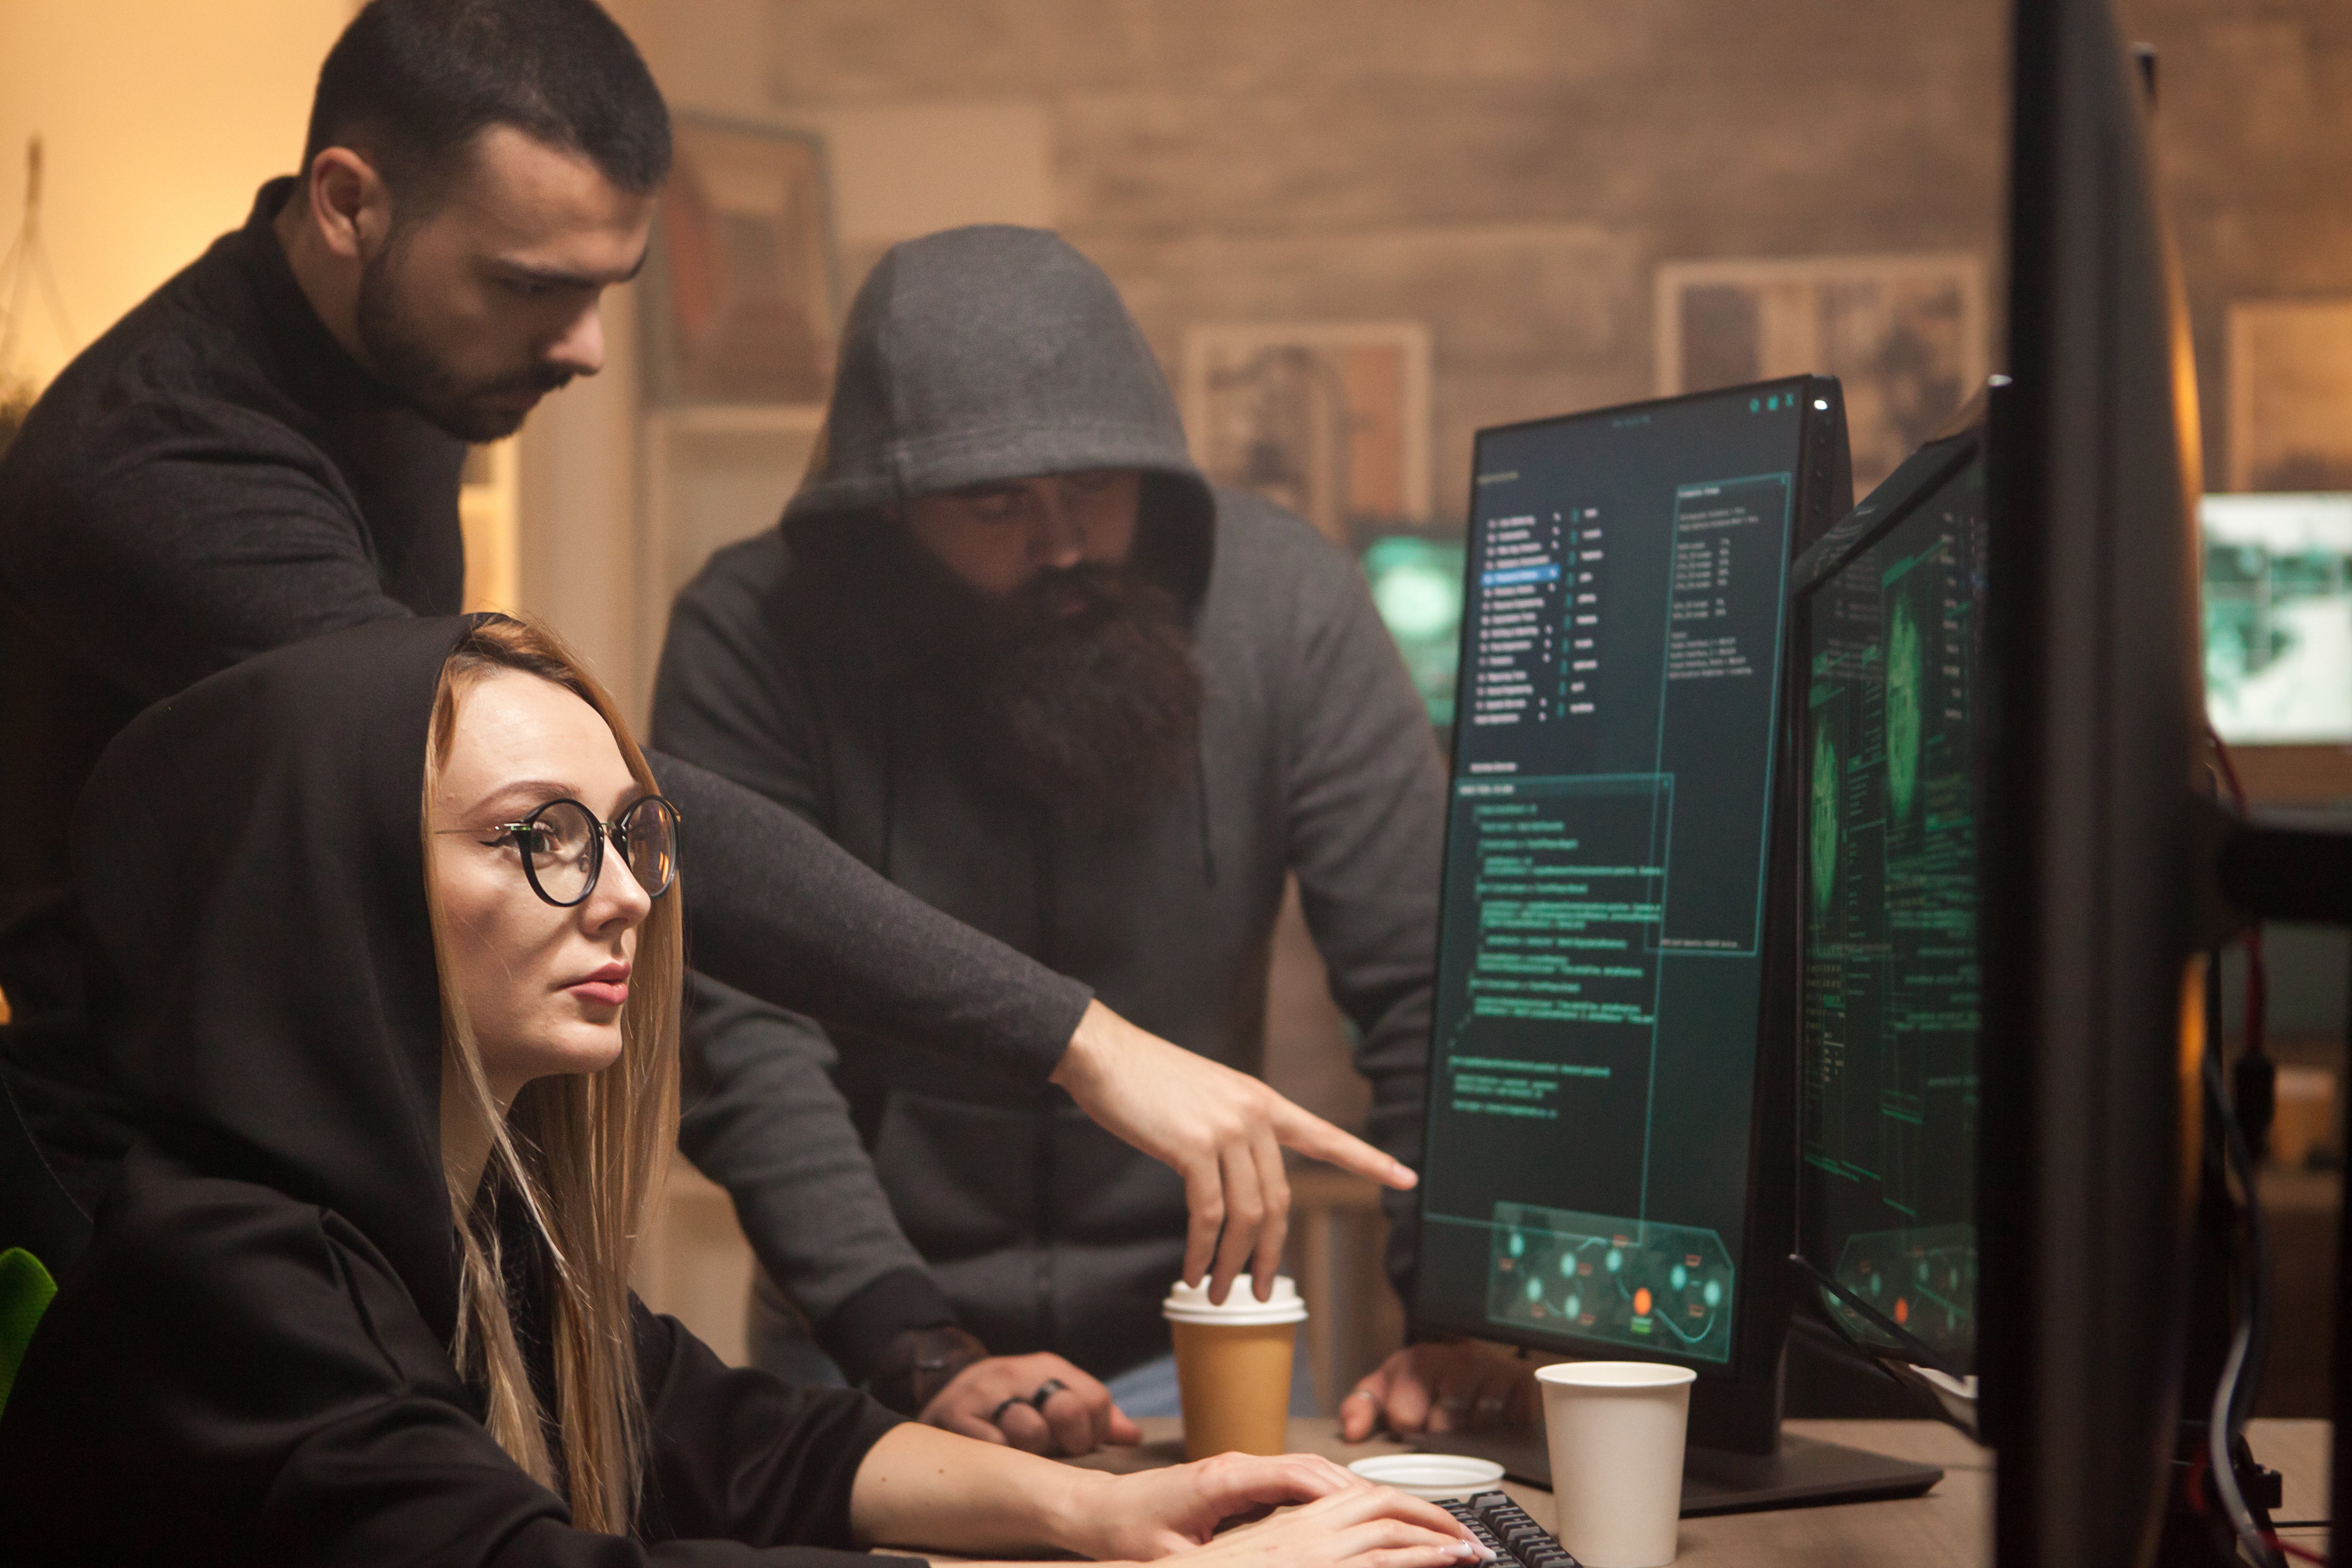 Three people in dark clothing representing cybercriminals looking at a computer screen  